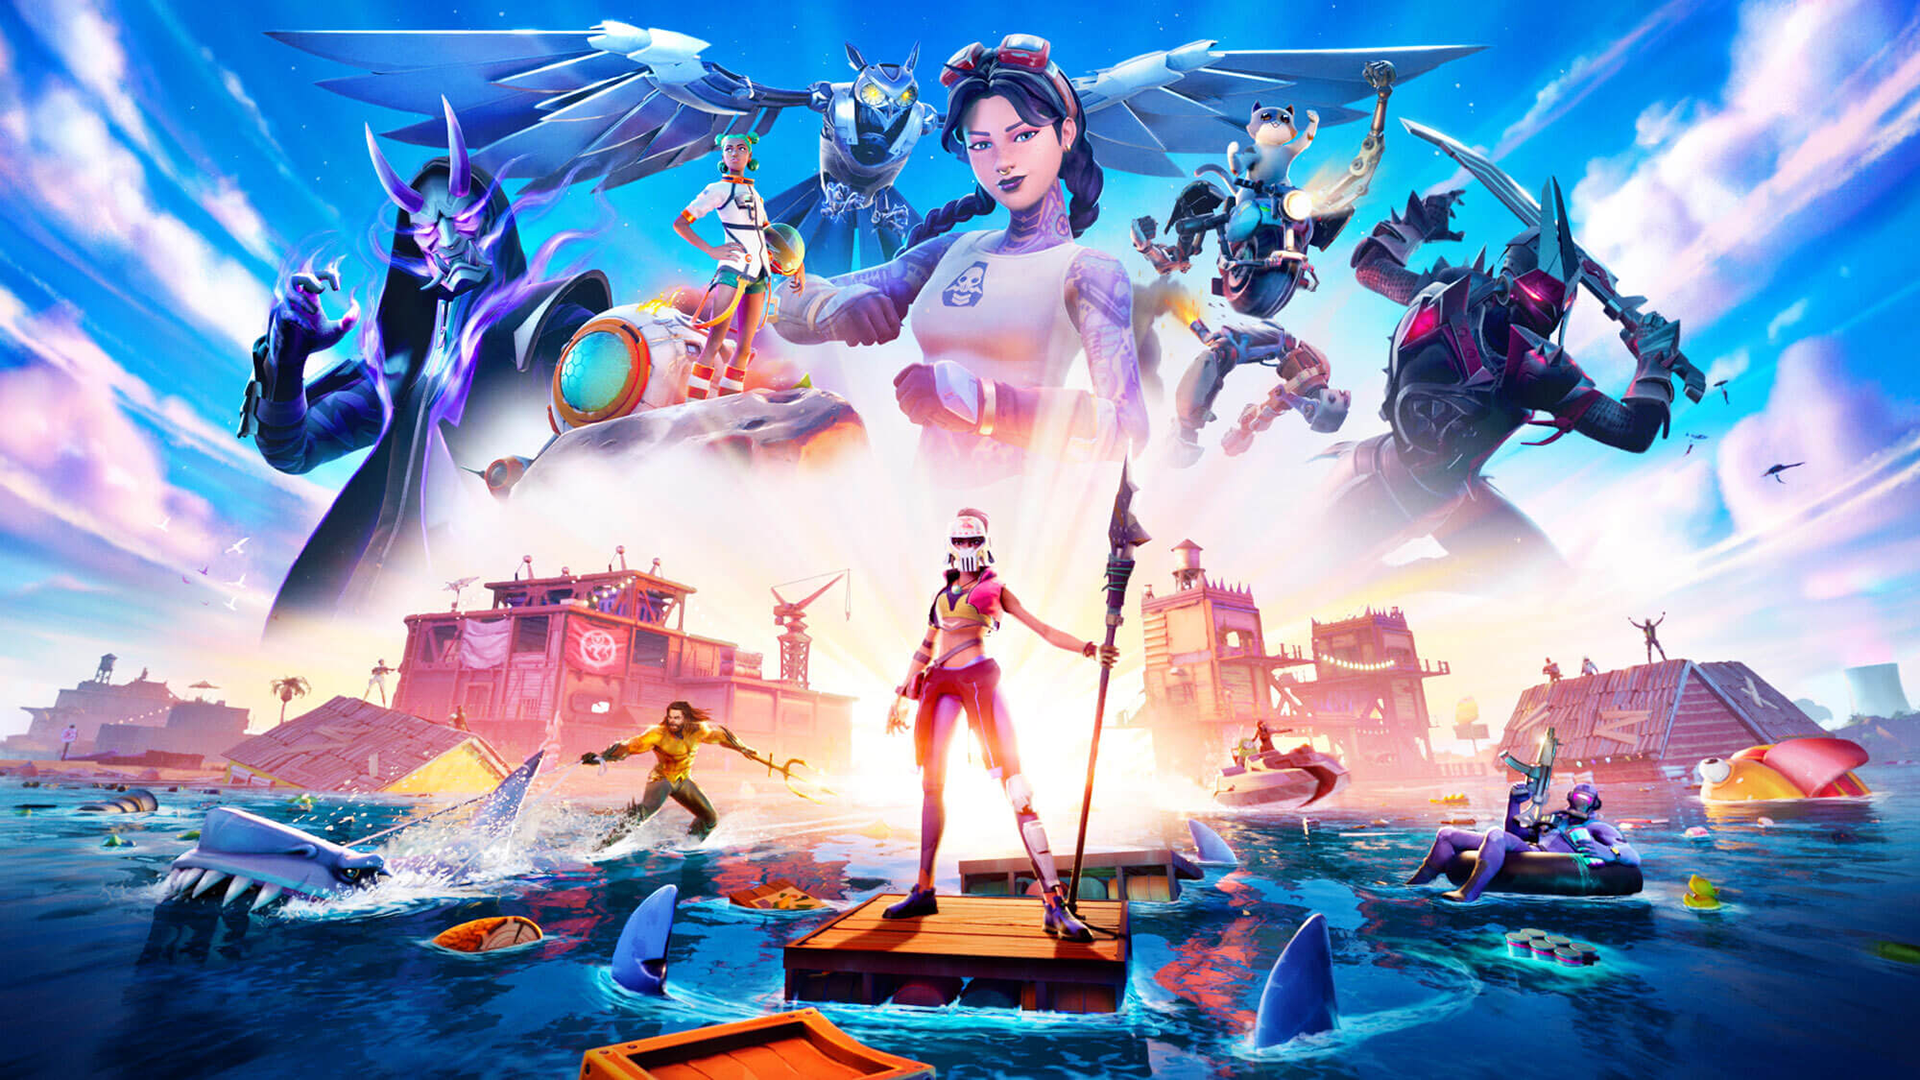 New Fortnite Loading Screen Character 4.3 Fortnite Map Battle Pass Mythic Weapons Aquaman Skin More To Know About Chapter 2 Season 3 Sporting News